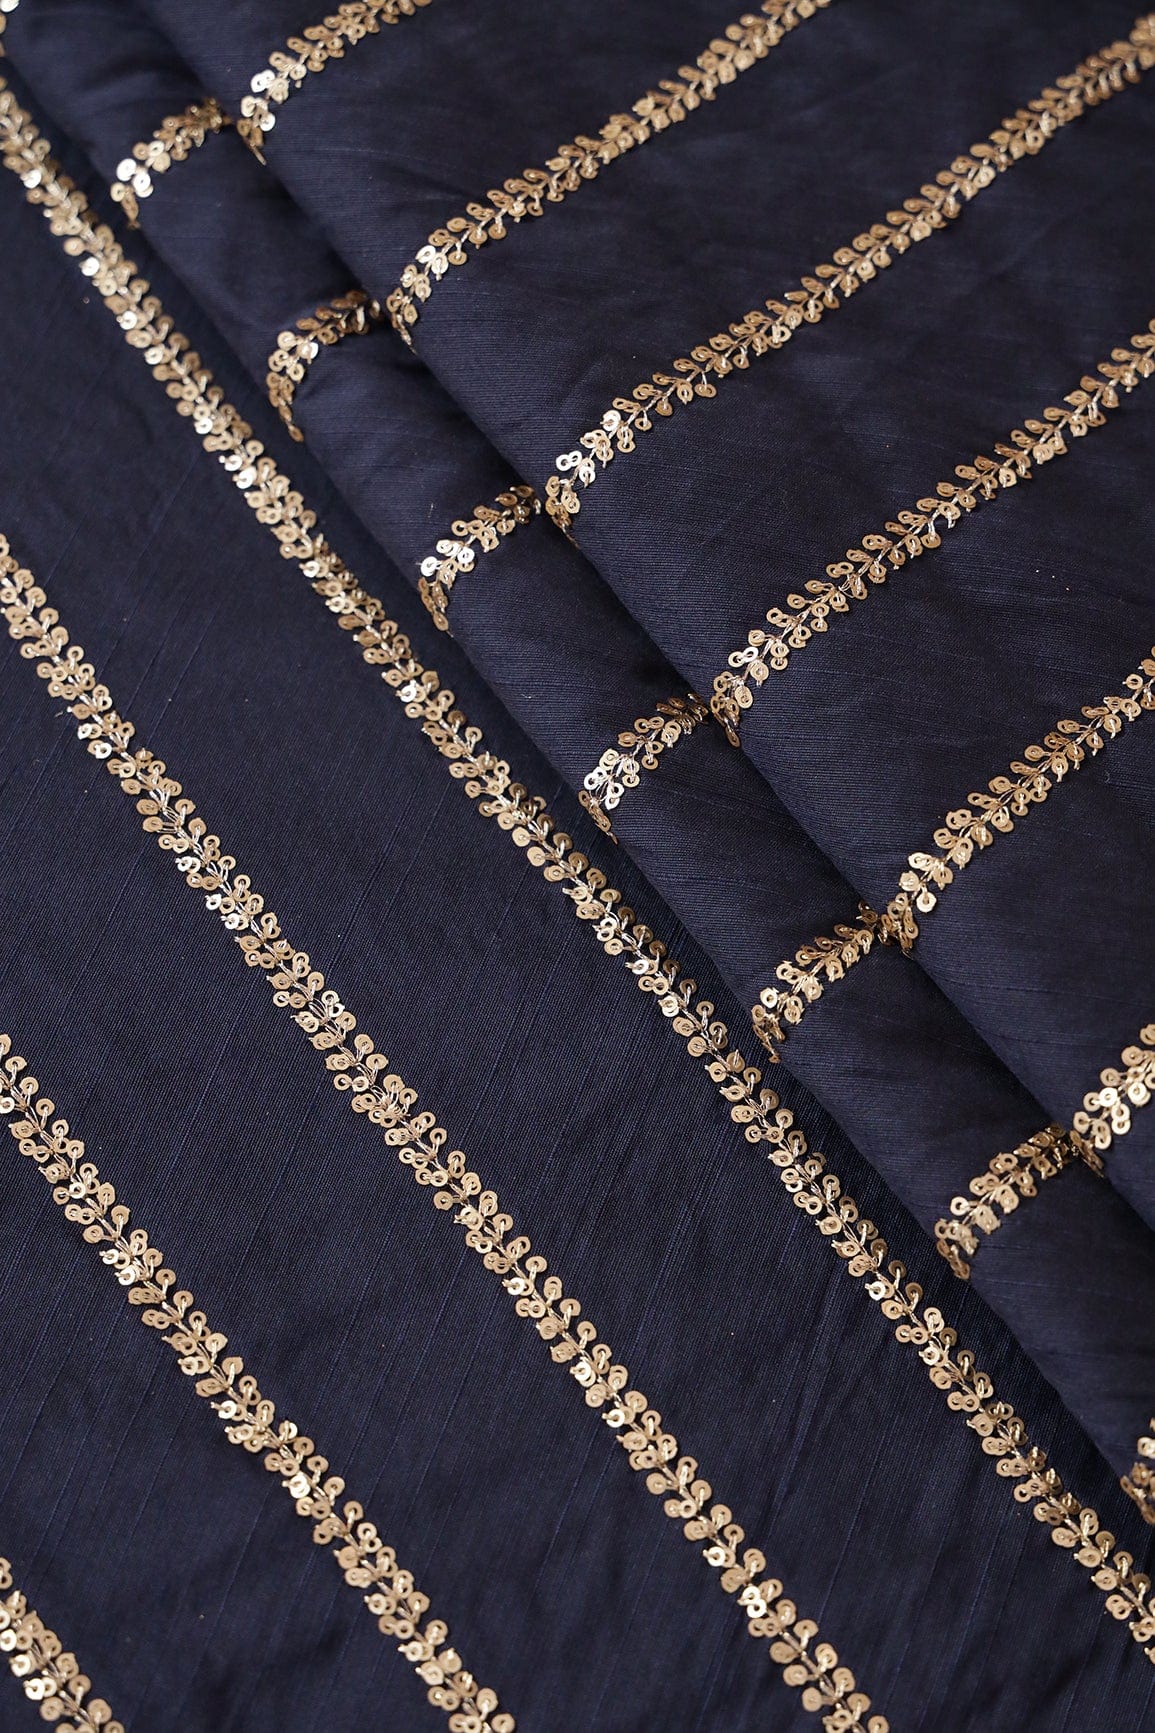 doeraa Embroidery Fabrics Gold Sequins With Gold Zari Stripes Embroidery Work On Navy Blue Raw Silk Fabric